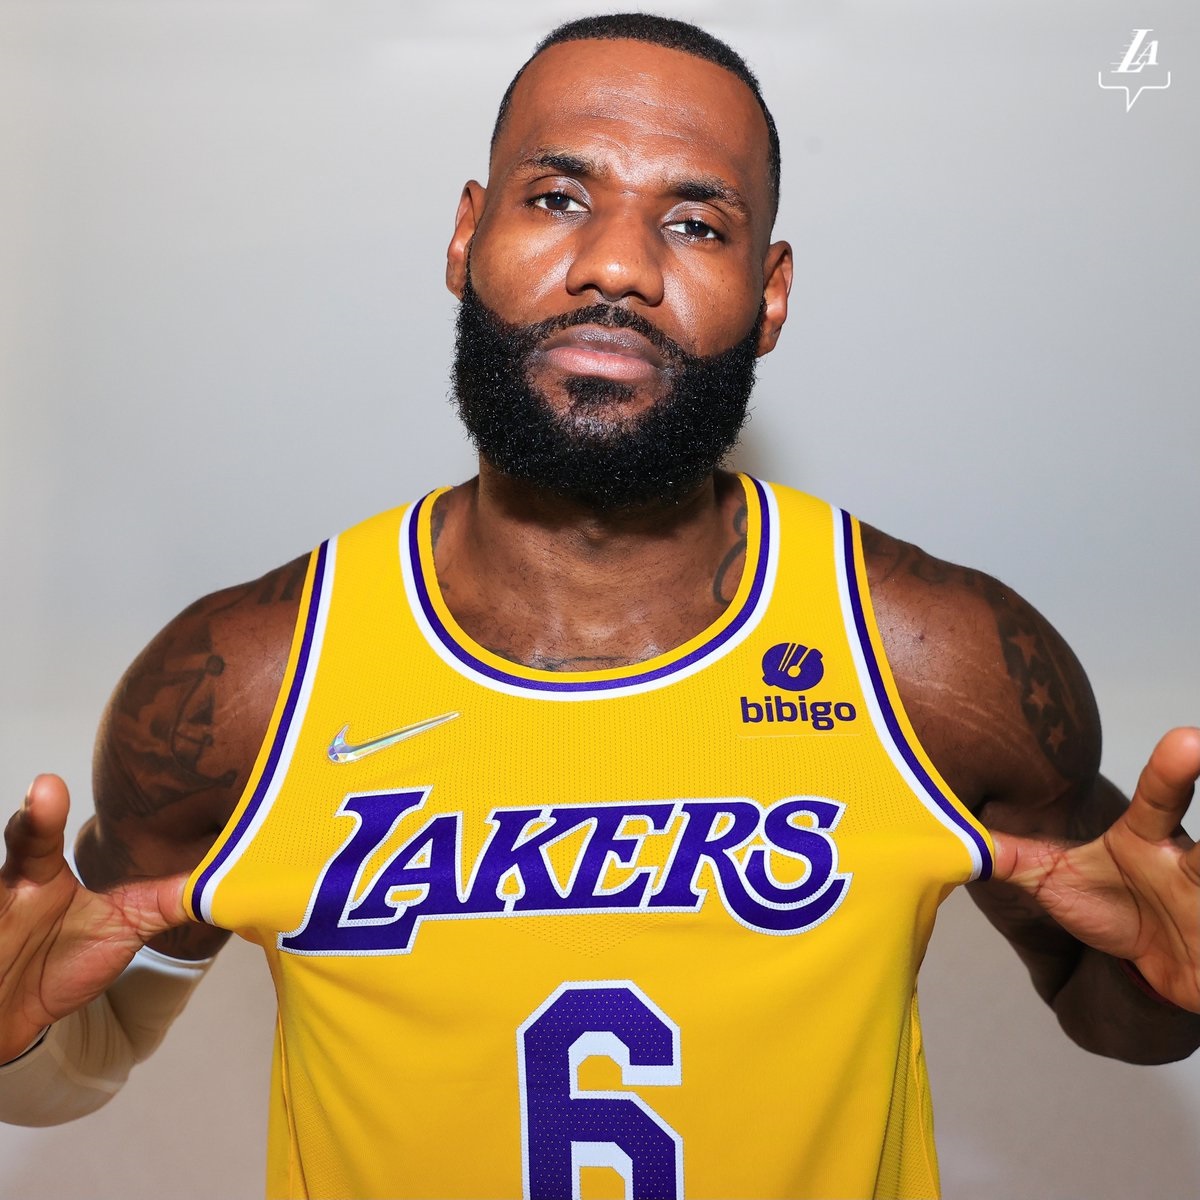 lakers maillot